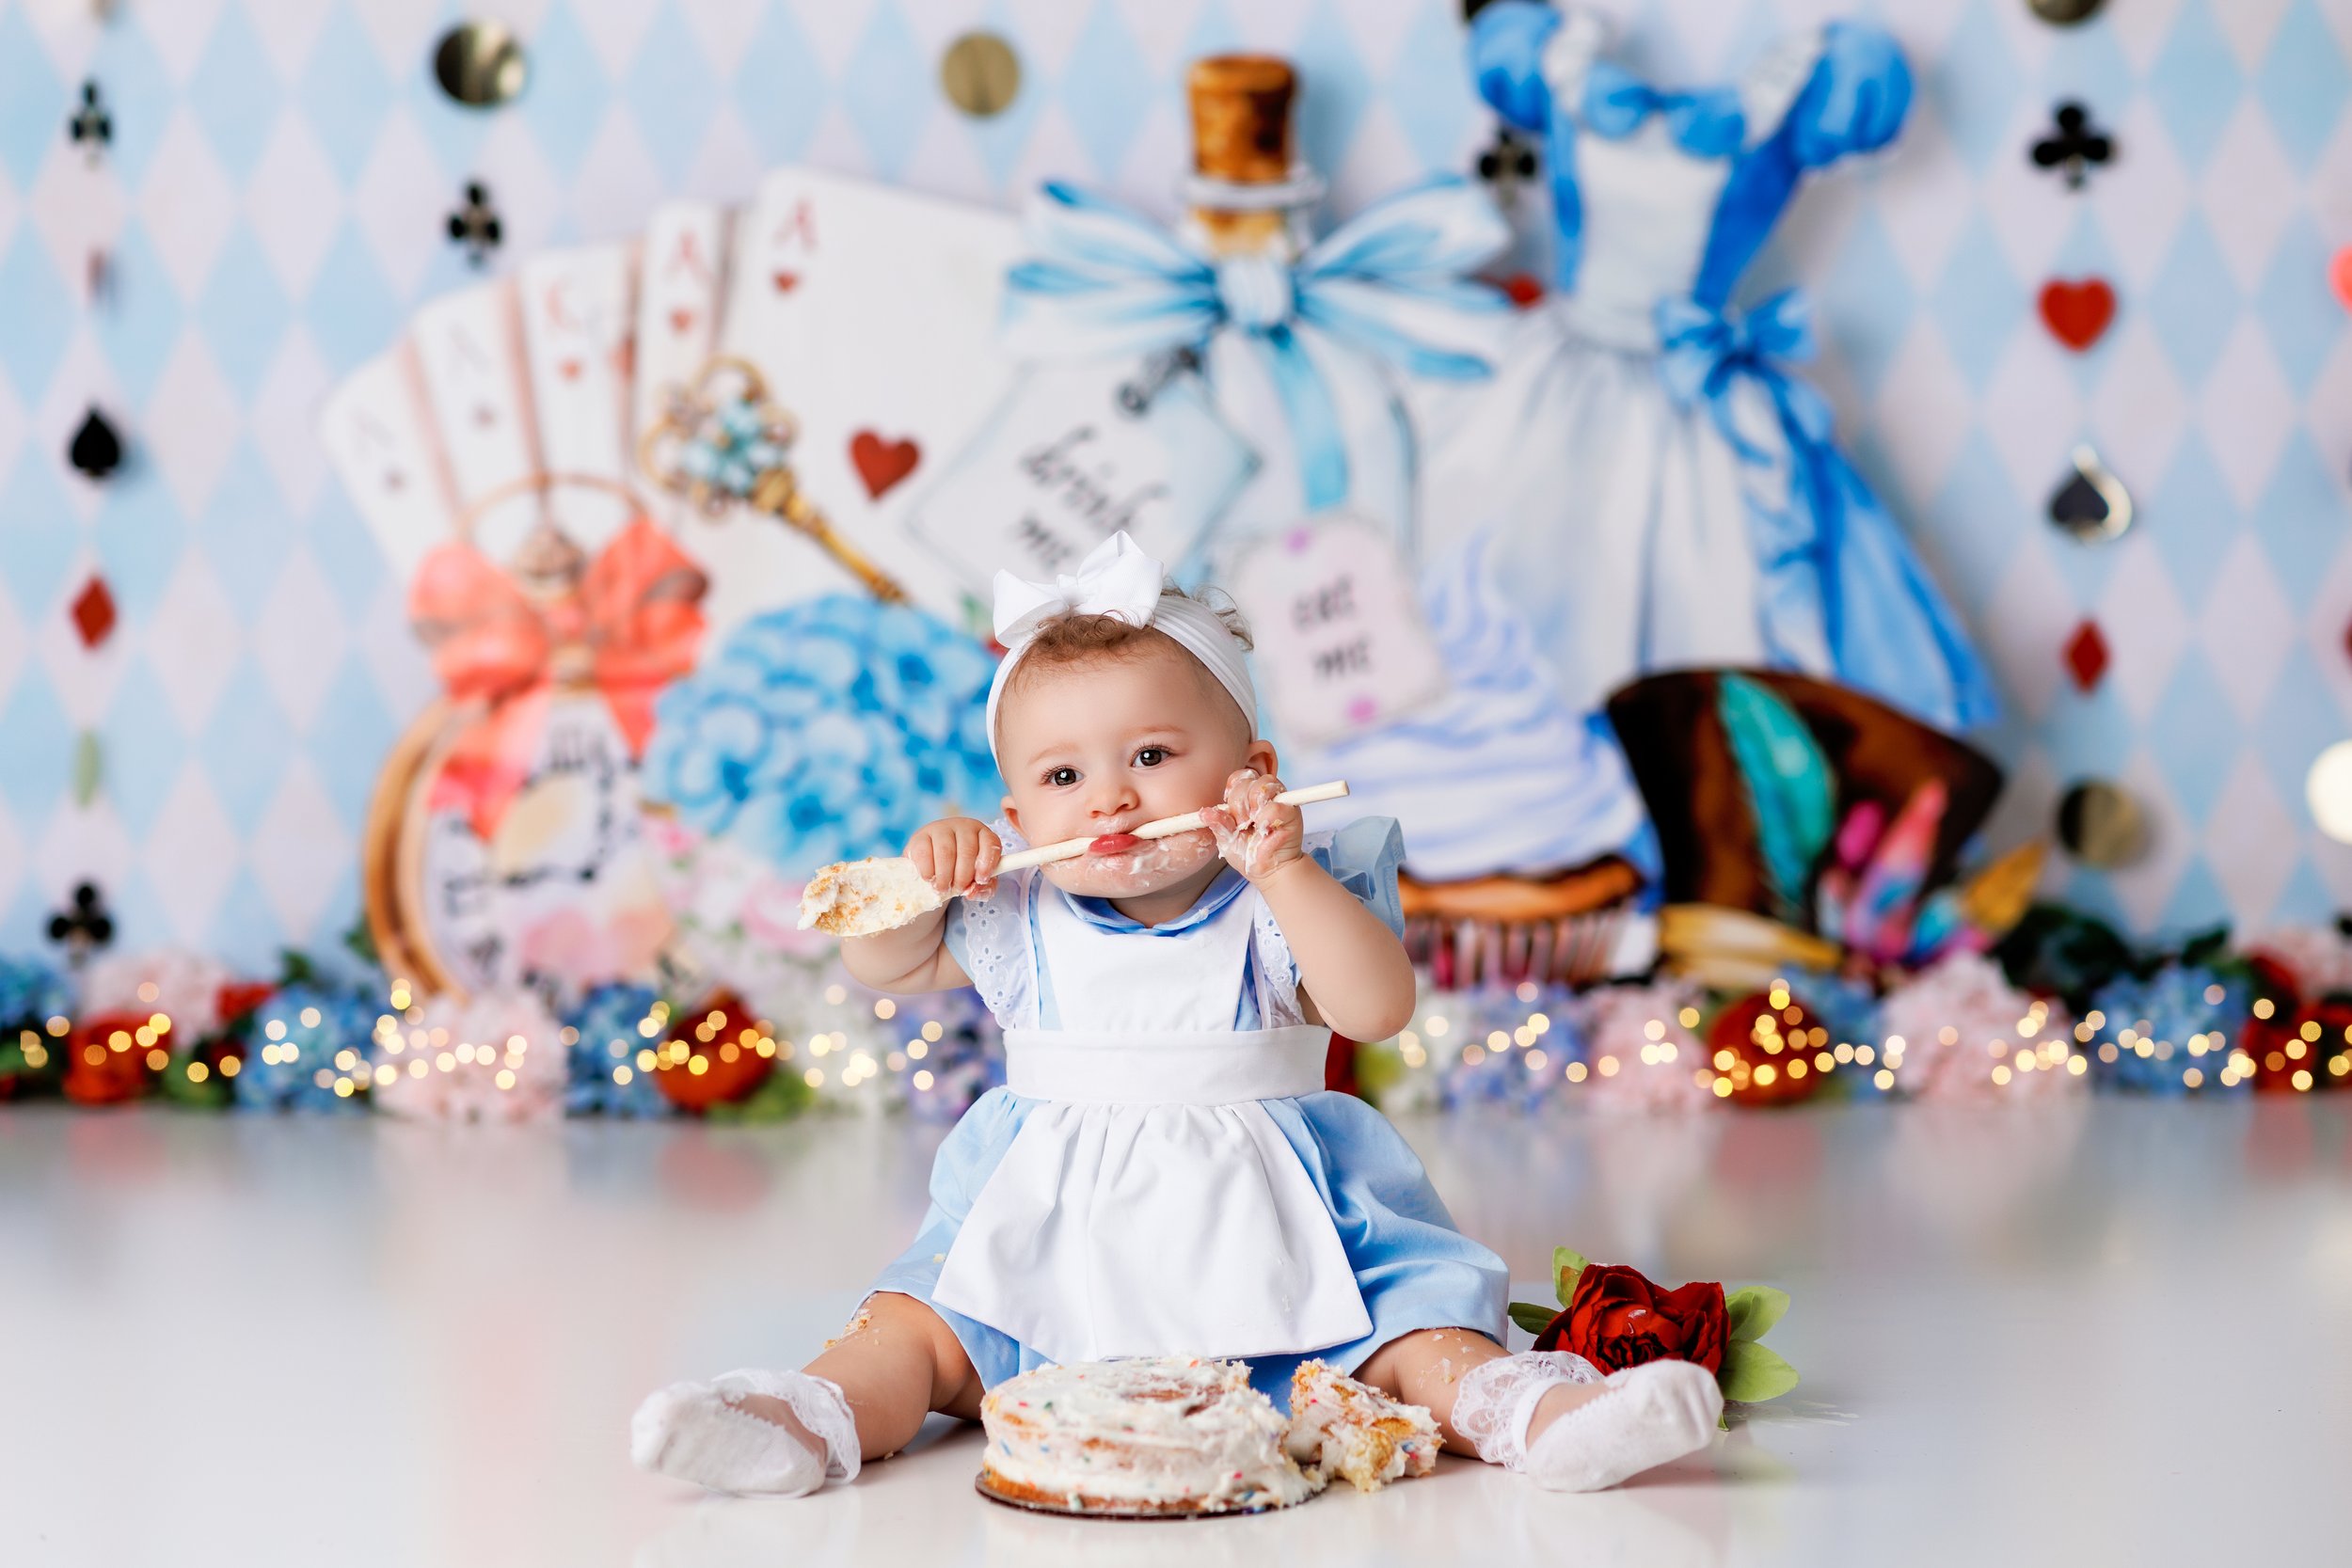  Baby girl in blue dress chews on a wooden spoon that she uses to eat her cake against an Alice in Wonderland backdrop 